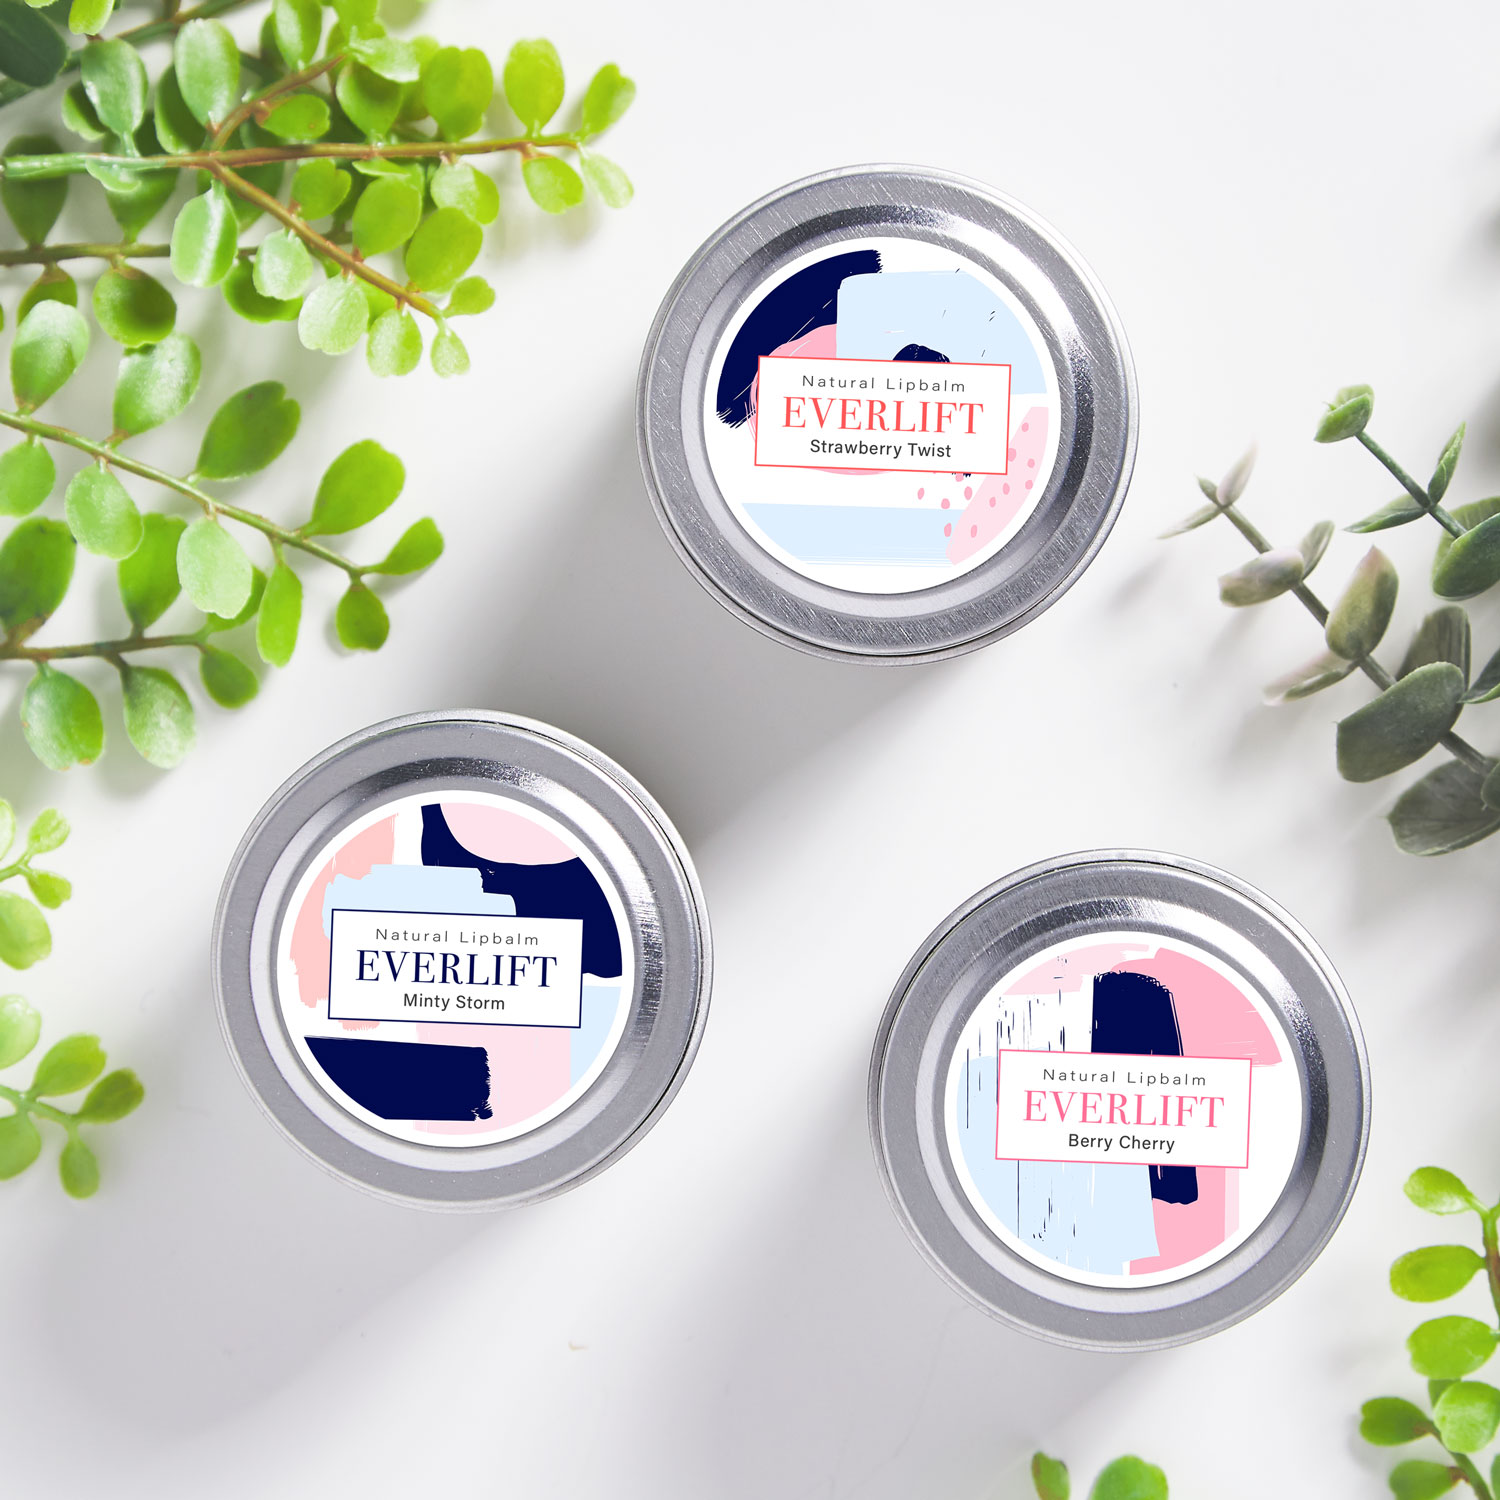 Use Avery labels to create lip balm labels you can print yourself or have professionally printed.